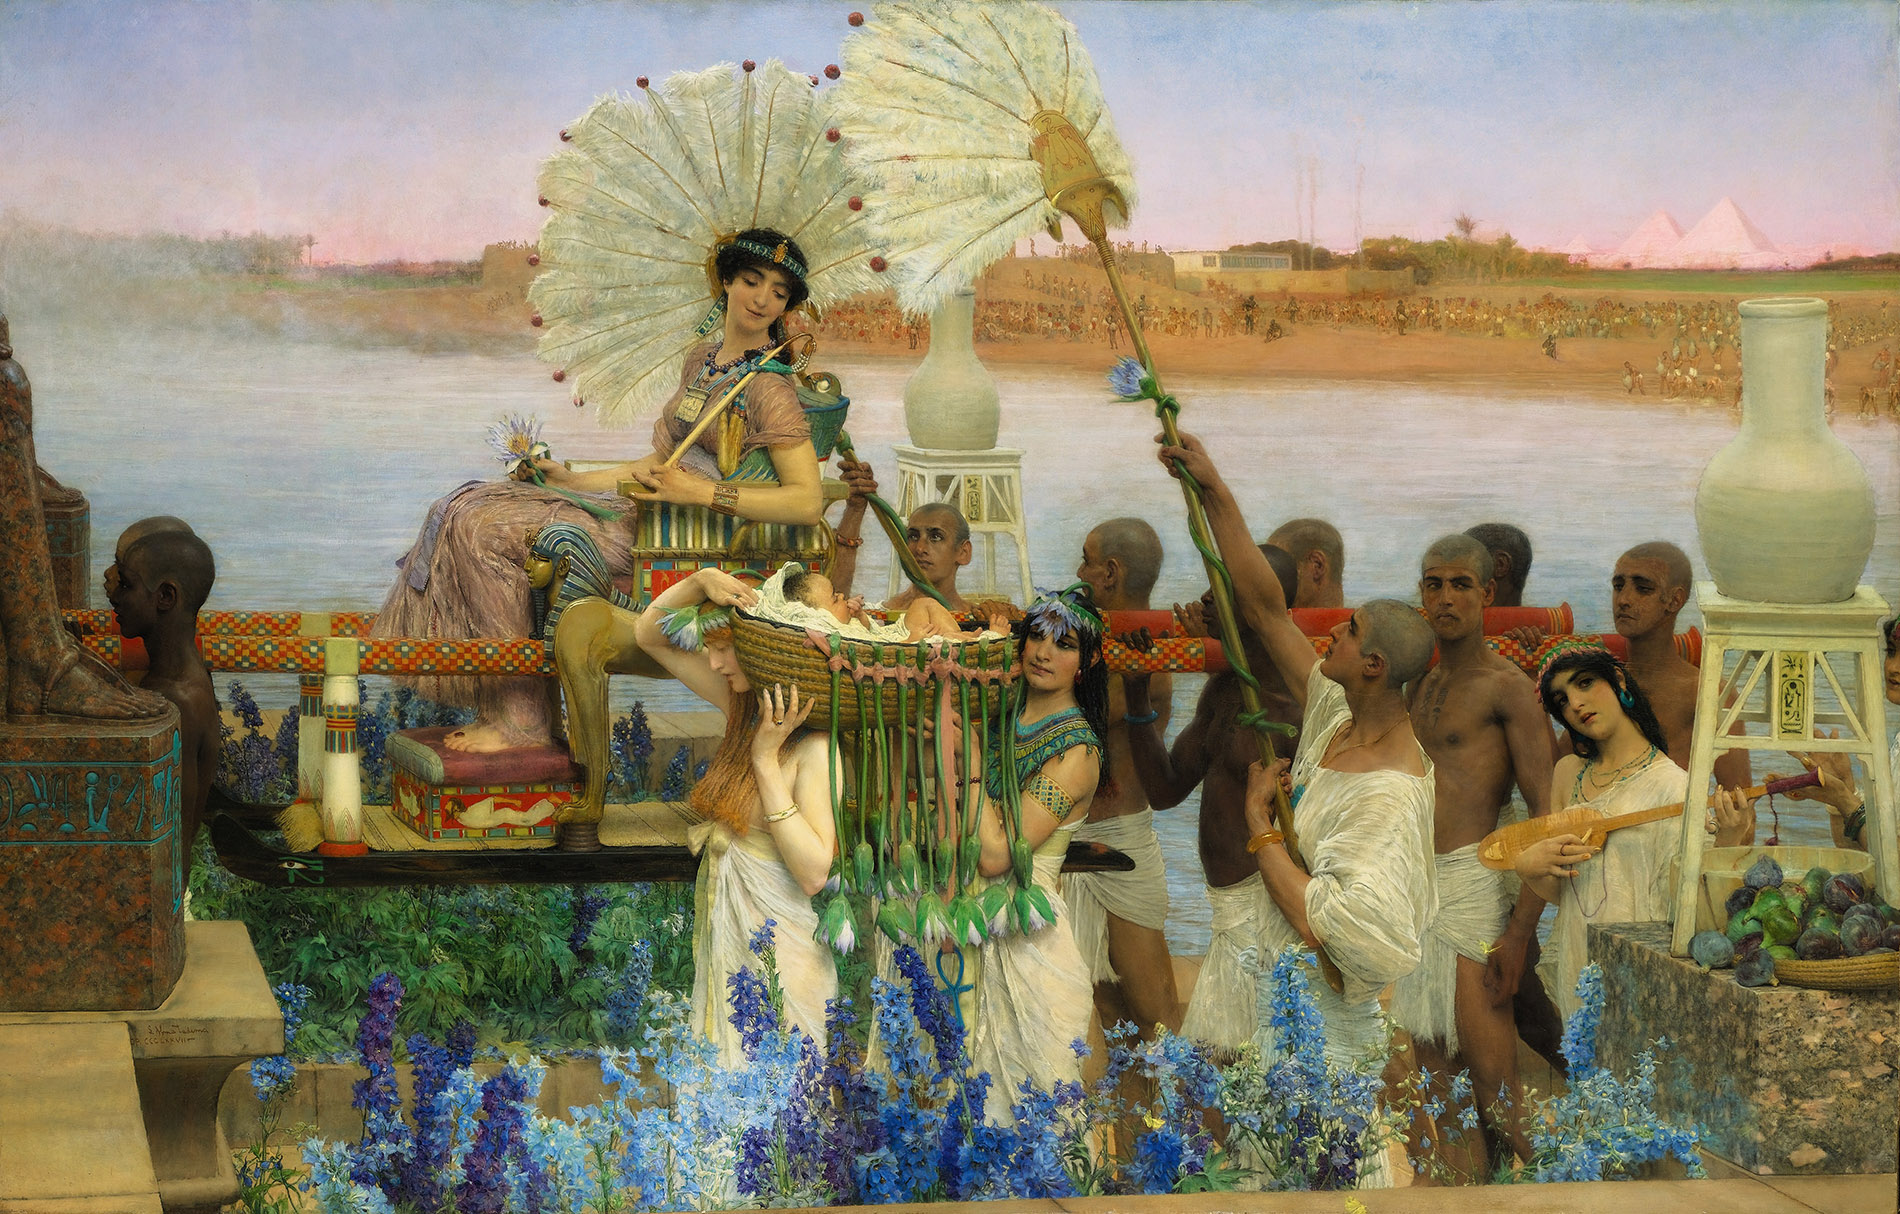 The Finding of Moses by Lawrence Alma-Tadema - 1904 - 136.7 by 213.4 cm private collection